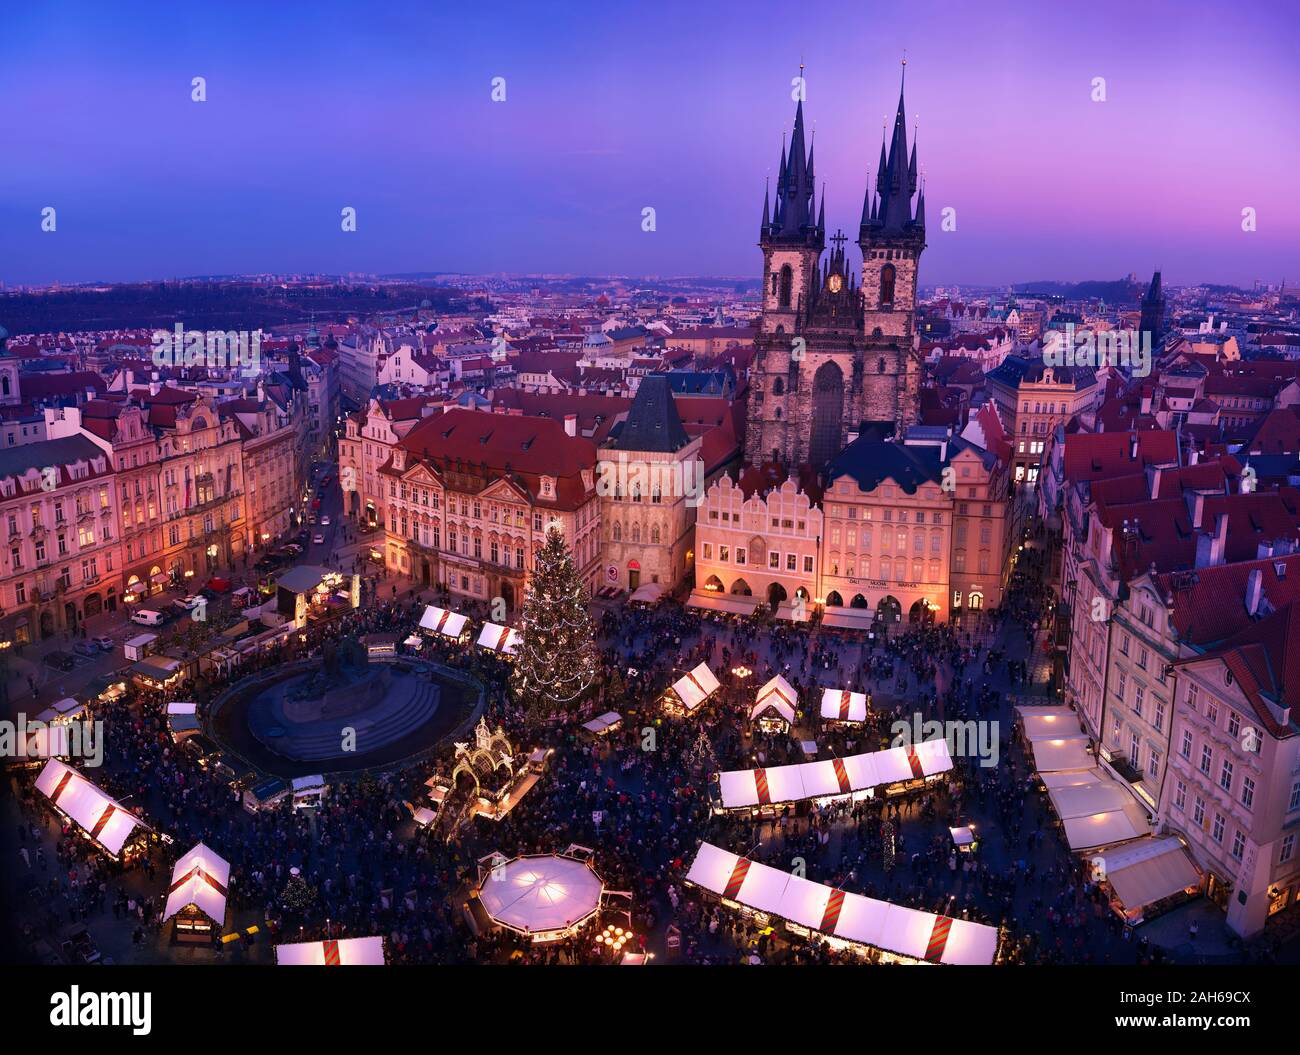 PRAGUE, THE CZECH REPUBLIC - DECEMBER 20, 2019: People enjoying Chistmas atmosphere at Christmas market on old town square after sunset. Stock Photo